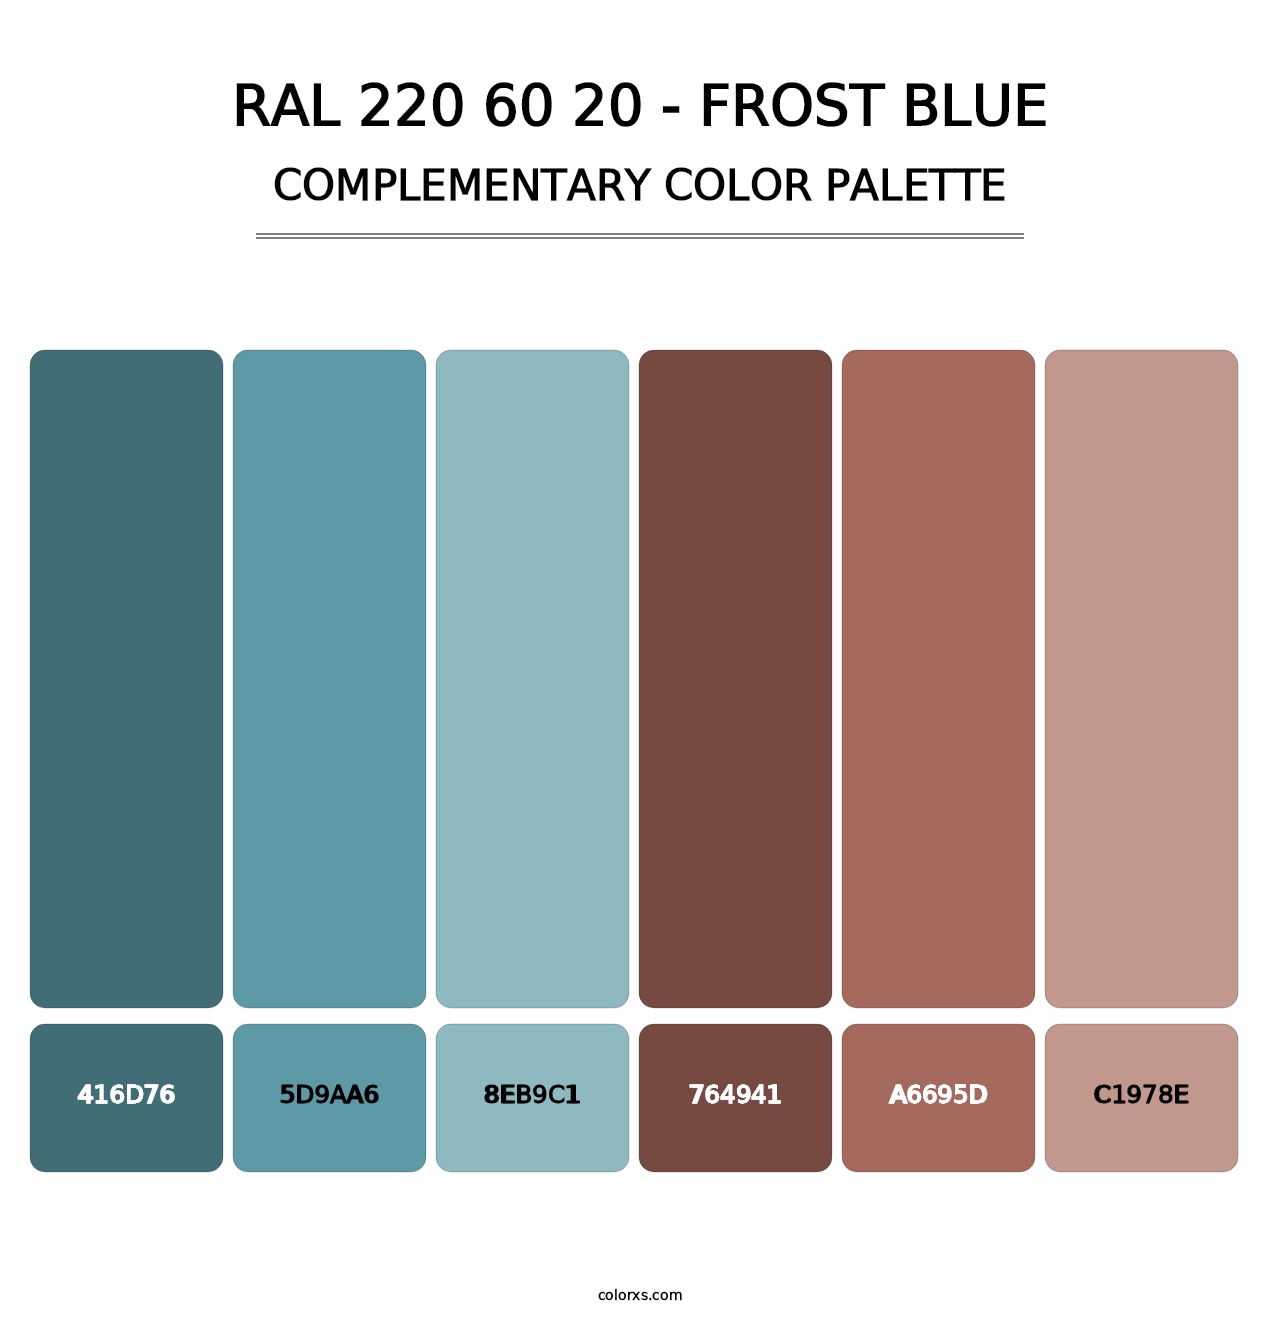 RAL 220 60 20 - Frost Blue - Complementary Color Palette